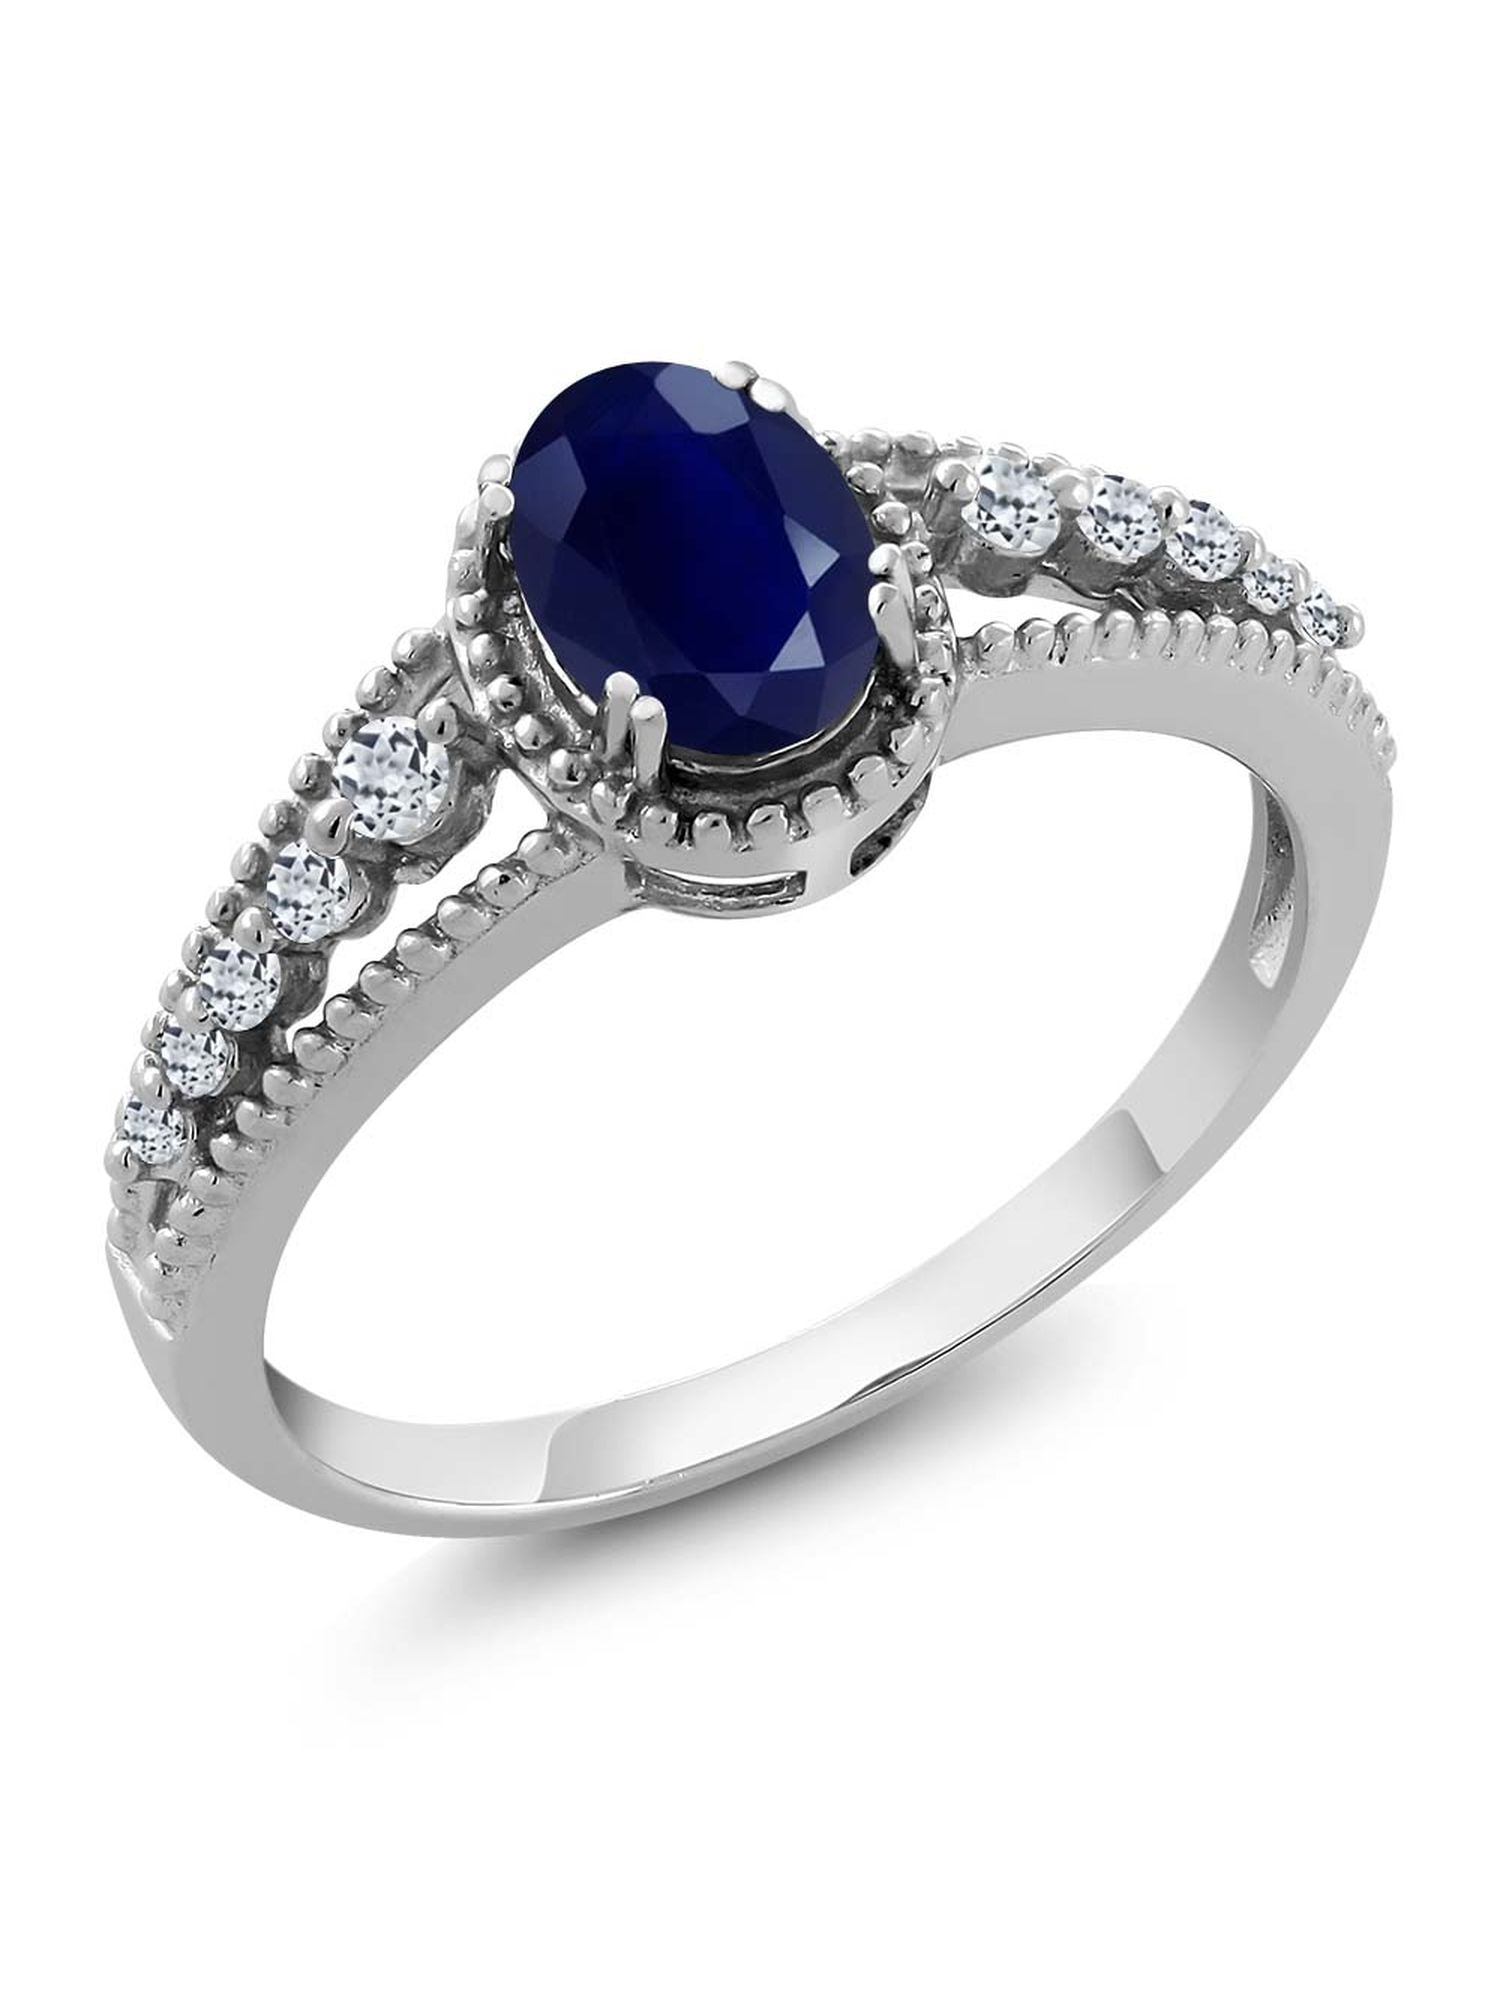 1.21 Carat 925 Sterling Silver Genuine Blue Sapphire Ring Multiple Sizes